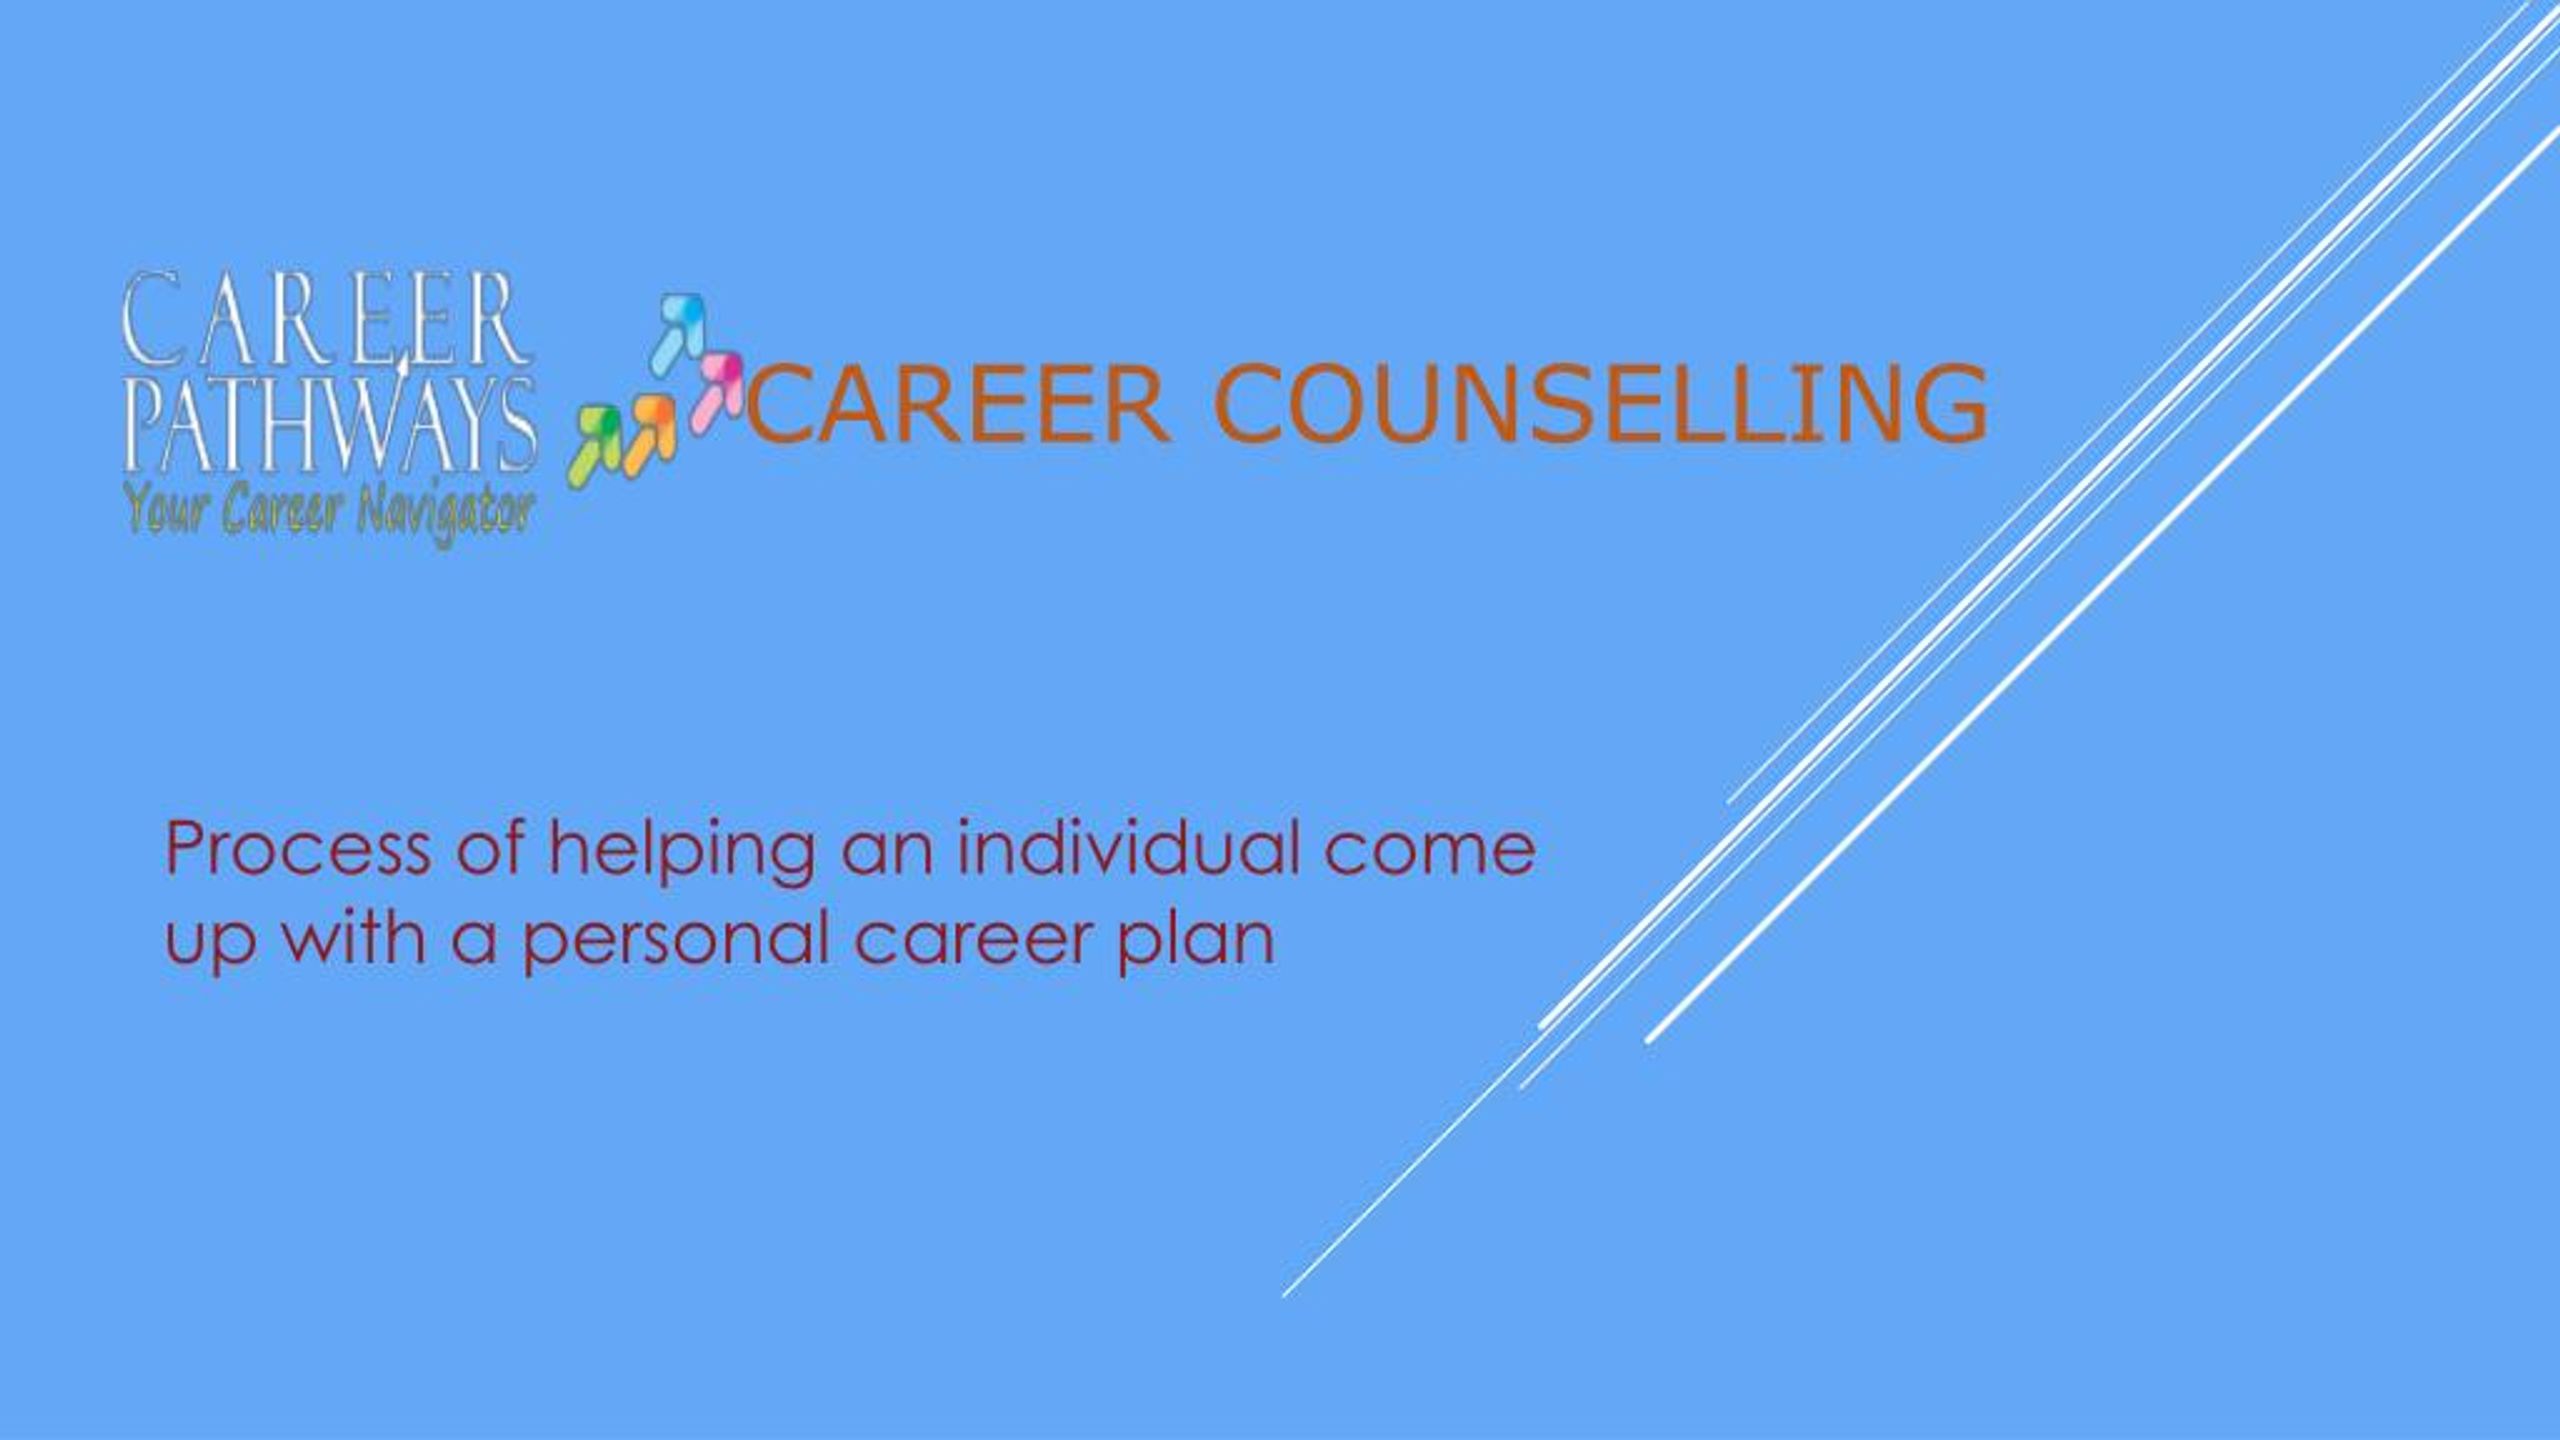 counselling in hrm ppt